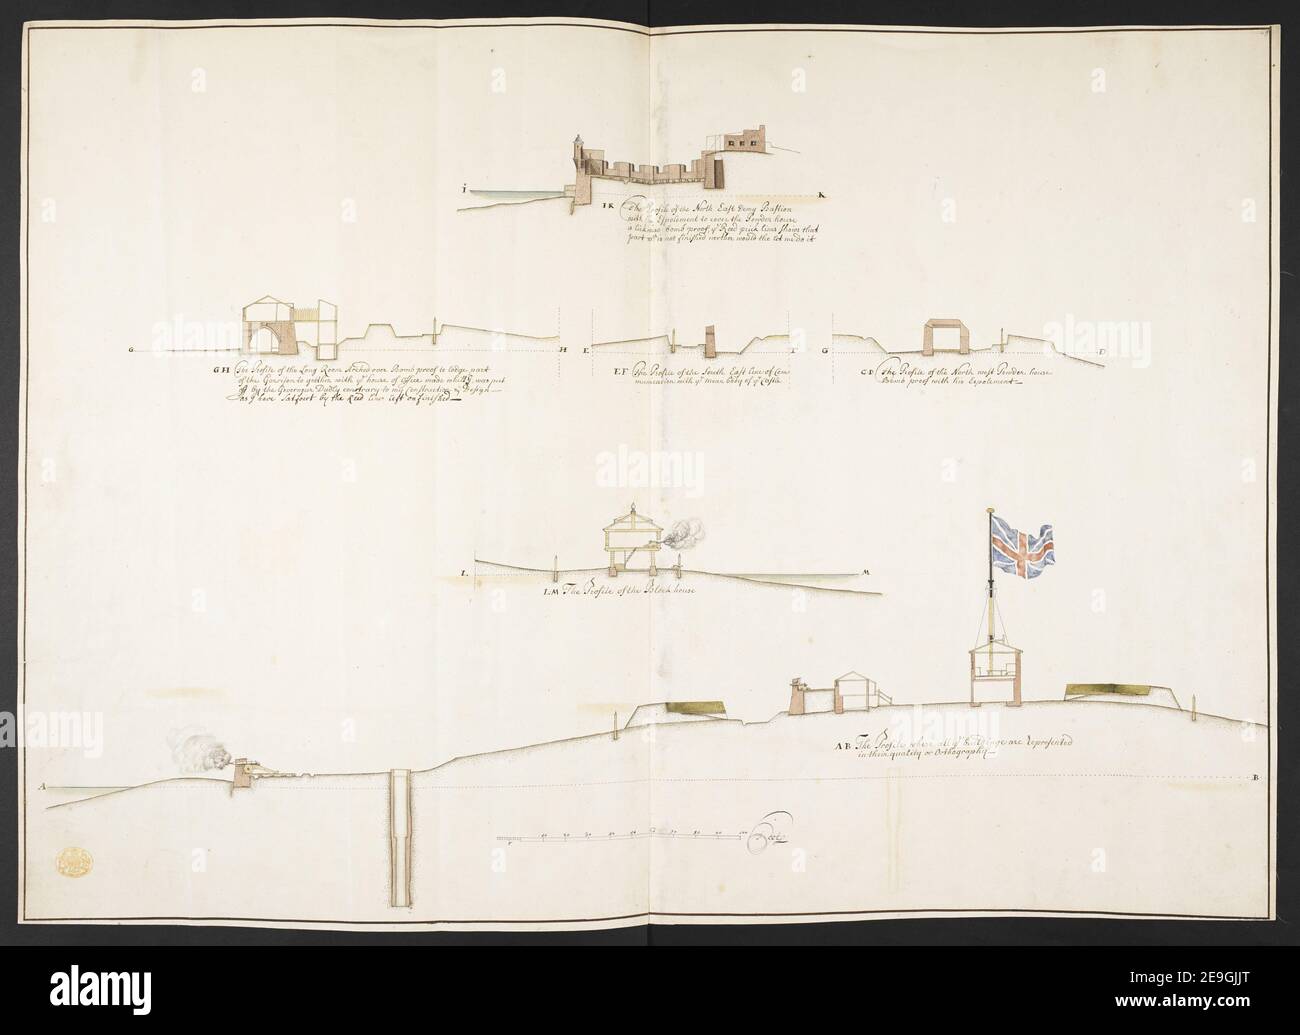 The Respective Profiles belonging to the great Iconografical Draughts of Castle Island in the Bay of Boston. Author  Romer, Wolfgang William 120.39.b. Date of publication: between 1705 and 1706.  Item type: 1 drawing Medium: ink, wash and watercolour Dimensions: sheet 51.1 x 72 cm  Former owner: George III, King of Great Britain, 1738-1820 Stock Photo